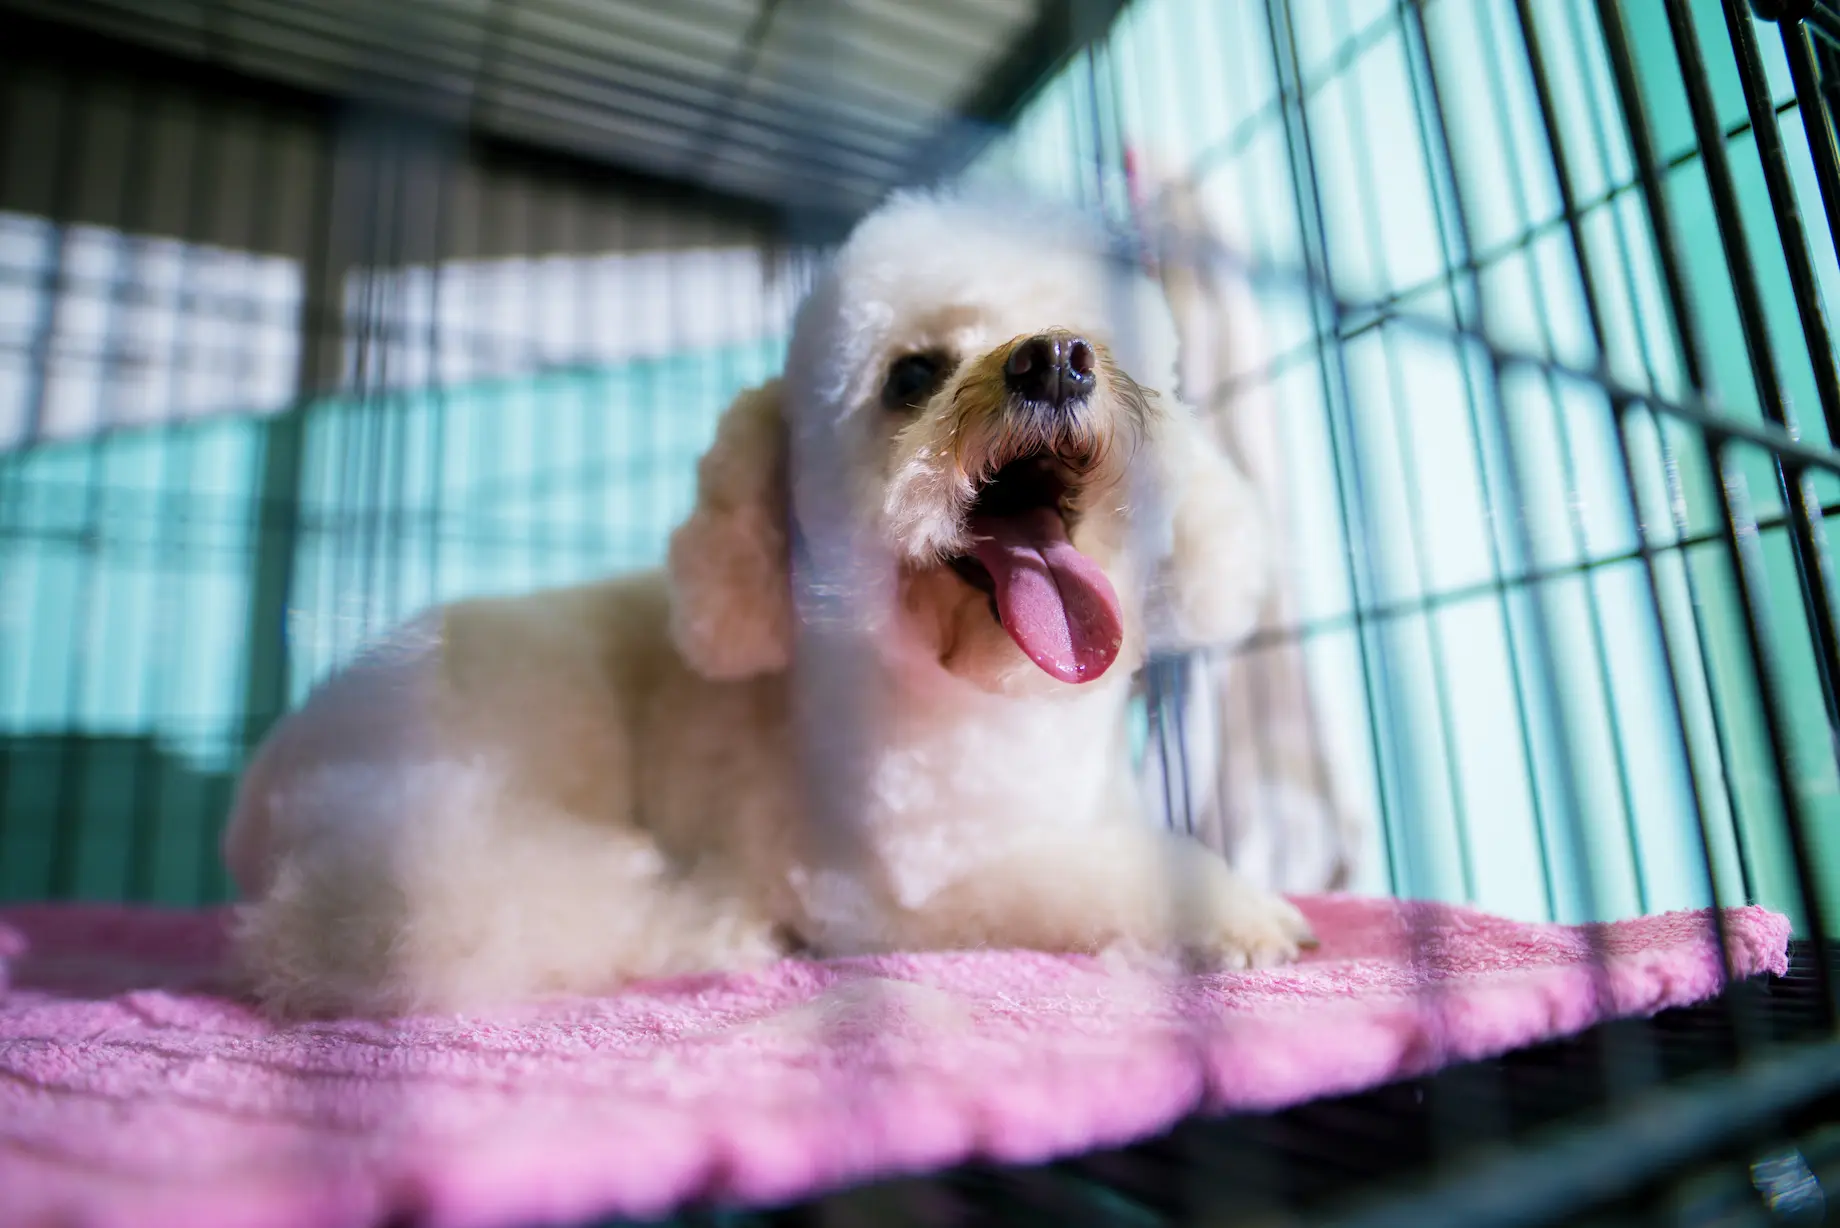 White puppy barking in a dog crate